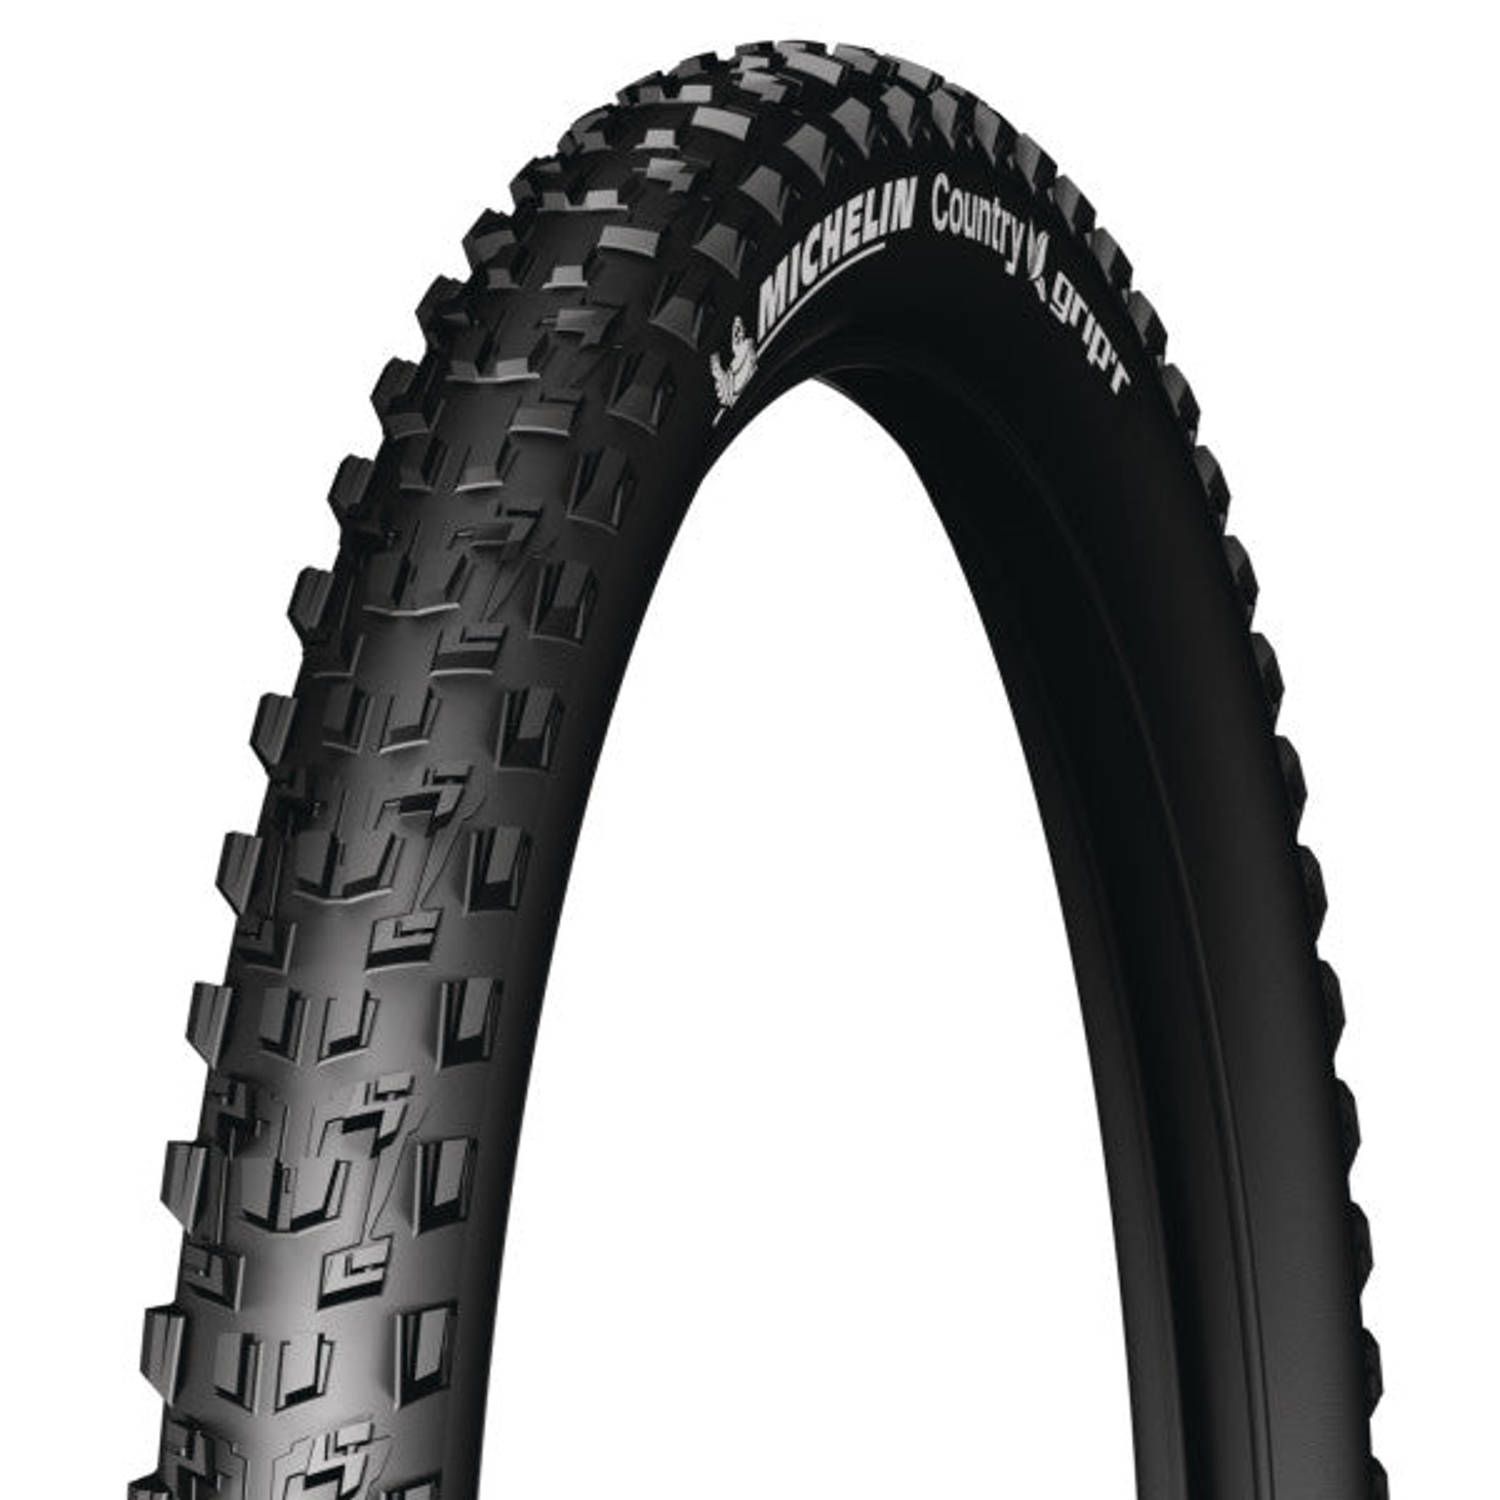 MICHELIN Country Grip'r draad 26 Black